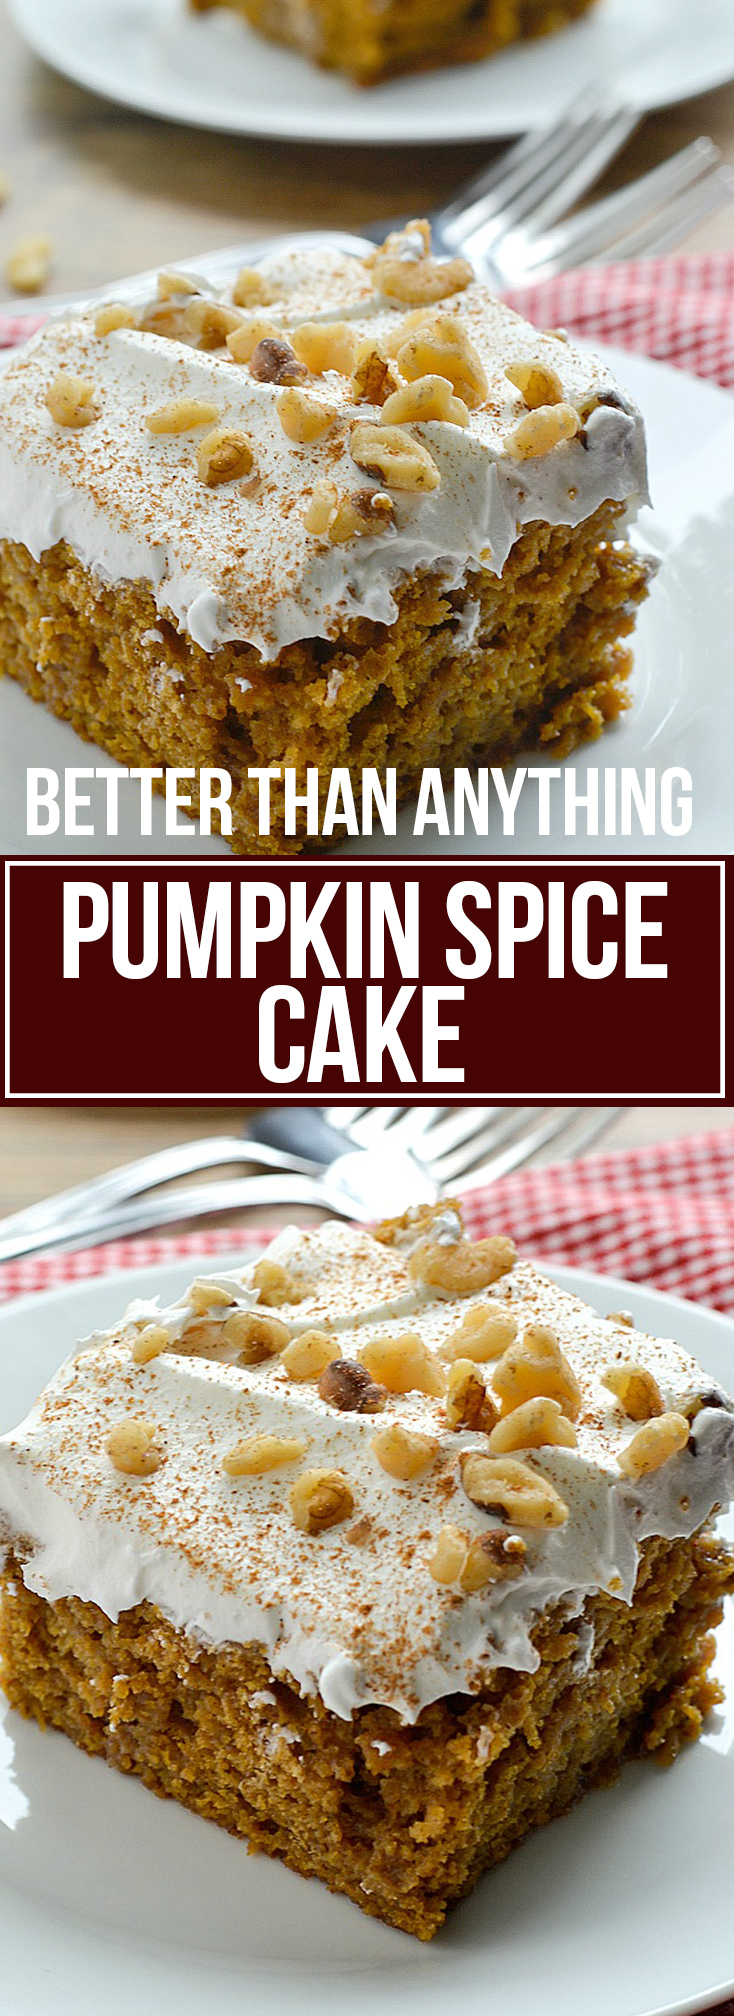 BETTER THAN ANYTHING PUMPKIN SPICE CAKE